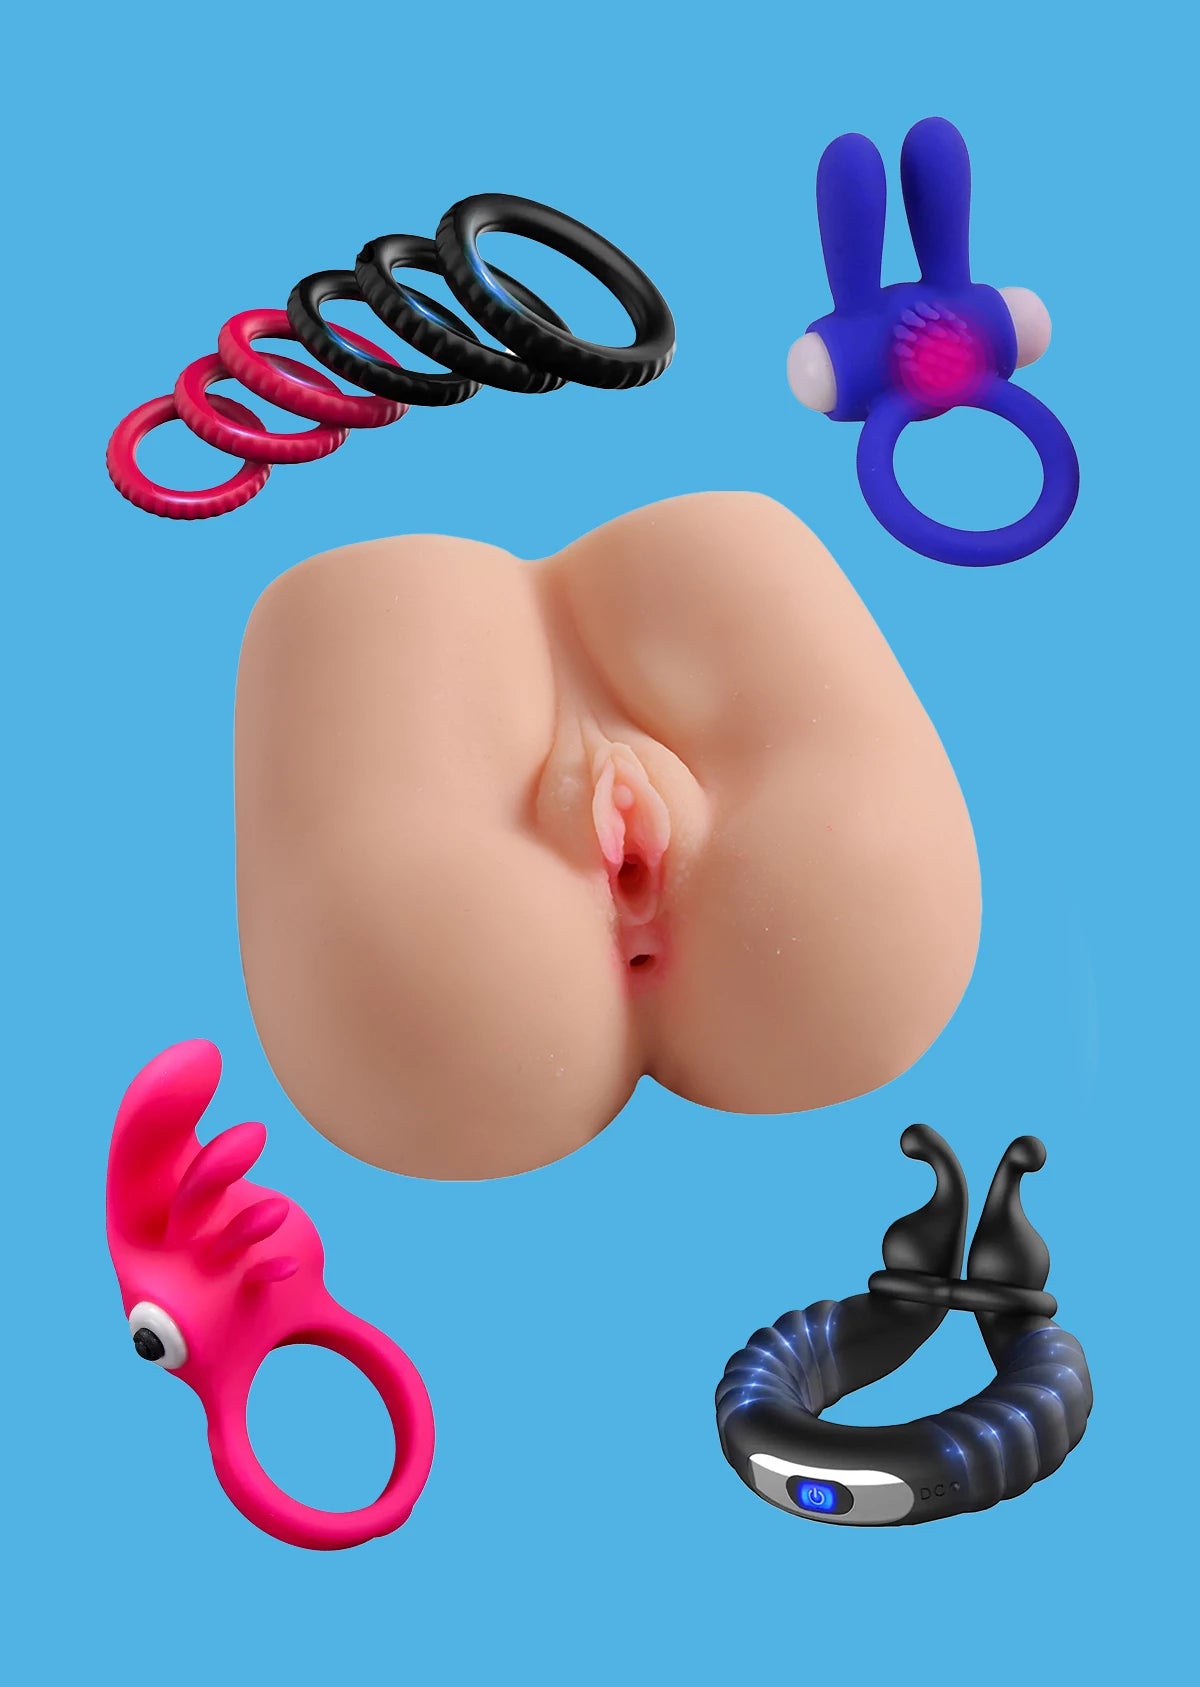 Male Sex Toys